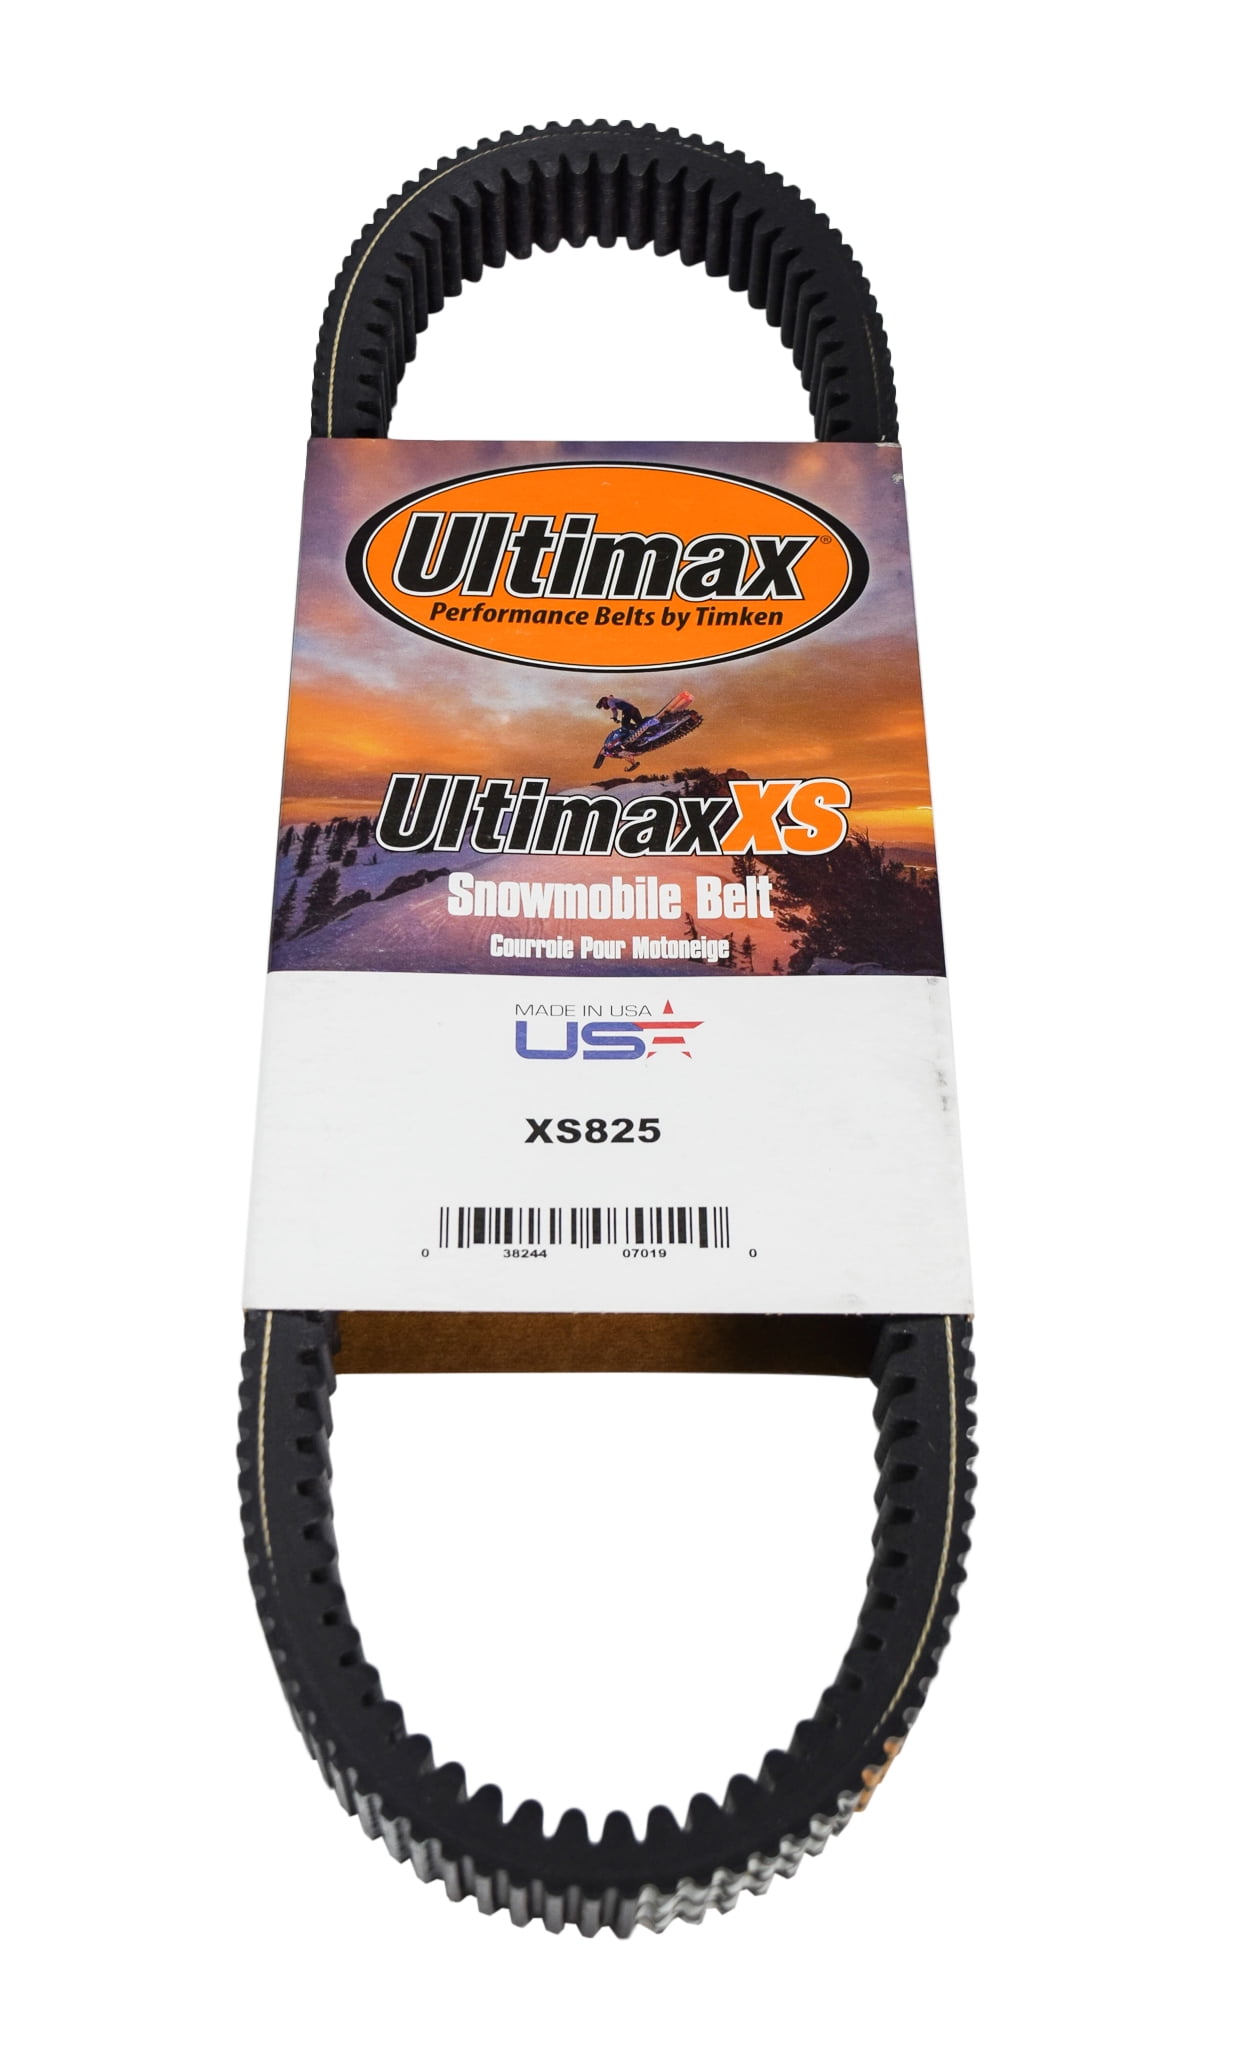 Made in USA Ultimax XP UXP480 SxS Drive Belt for Polaris RZR Turbo Ranger 900 1000 OEM Replacement for 3211202 3211186 with Compass Keychain 